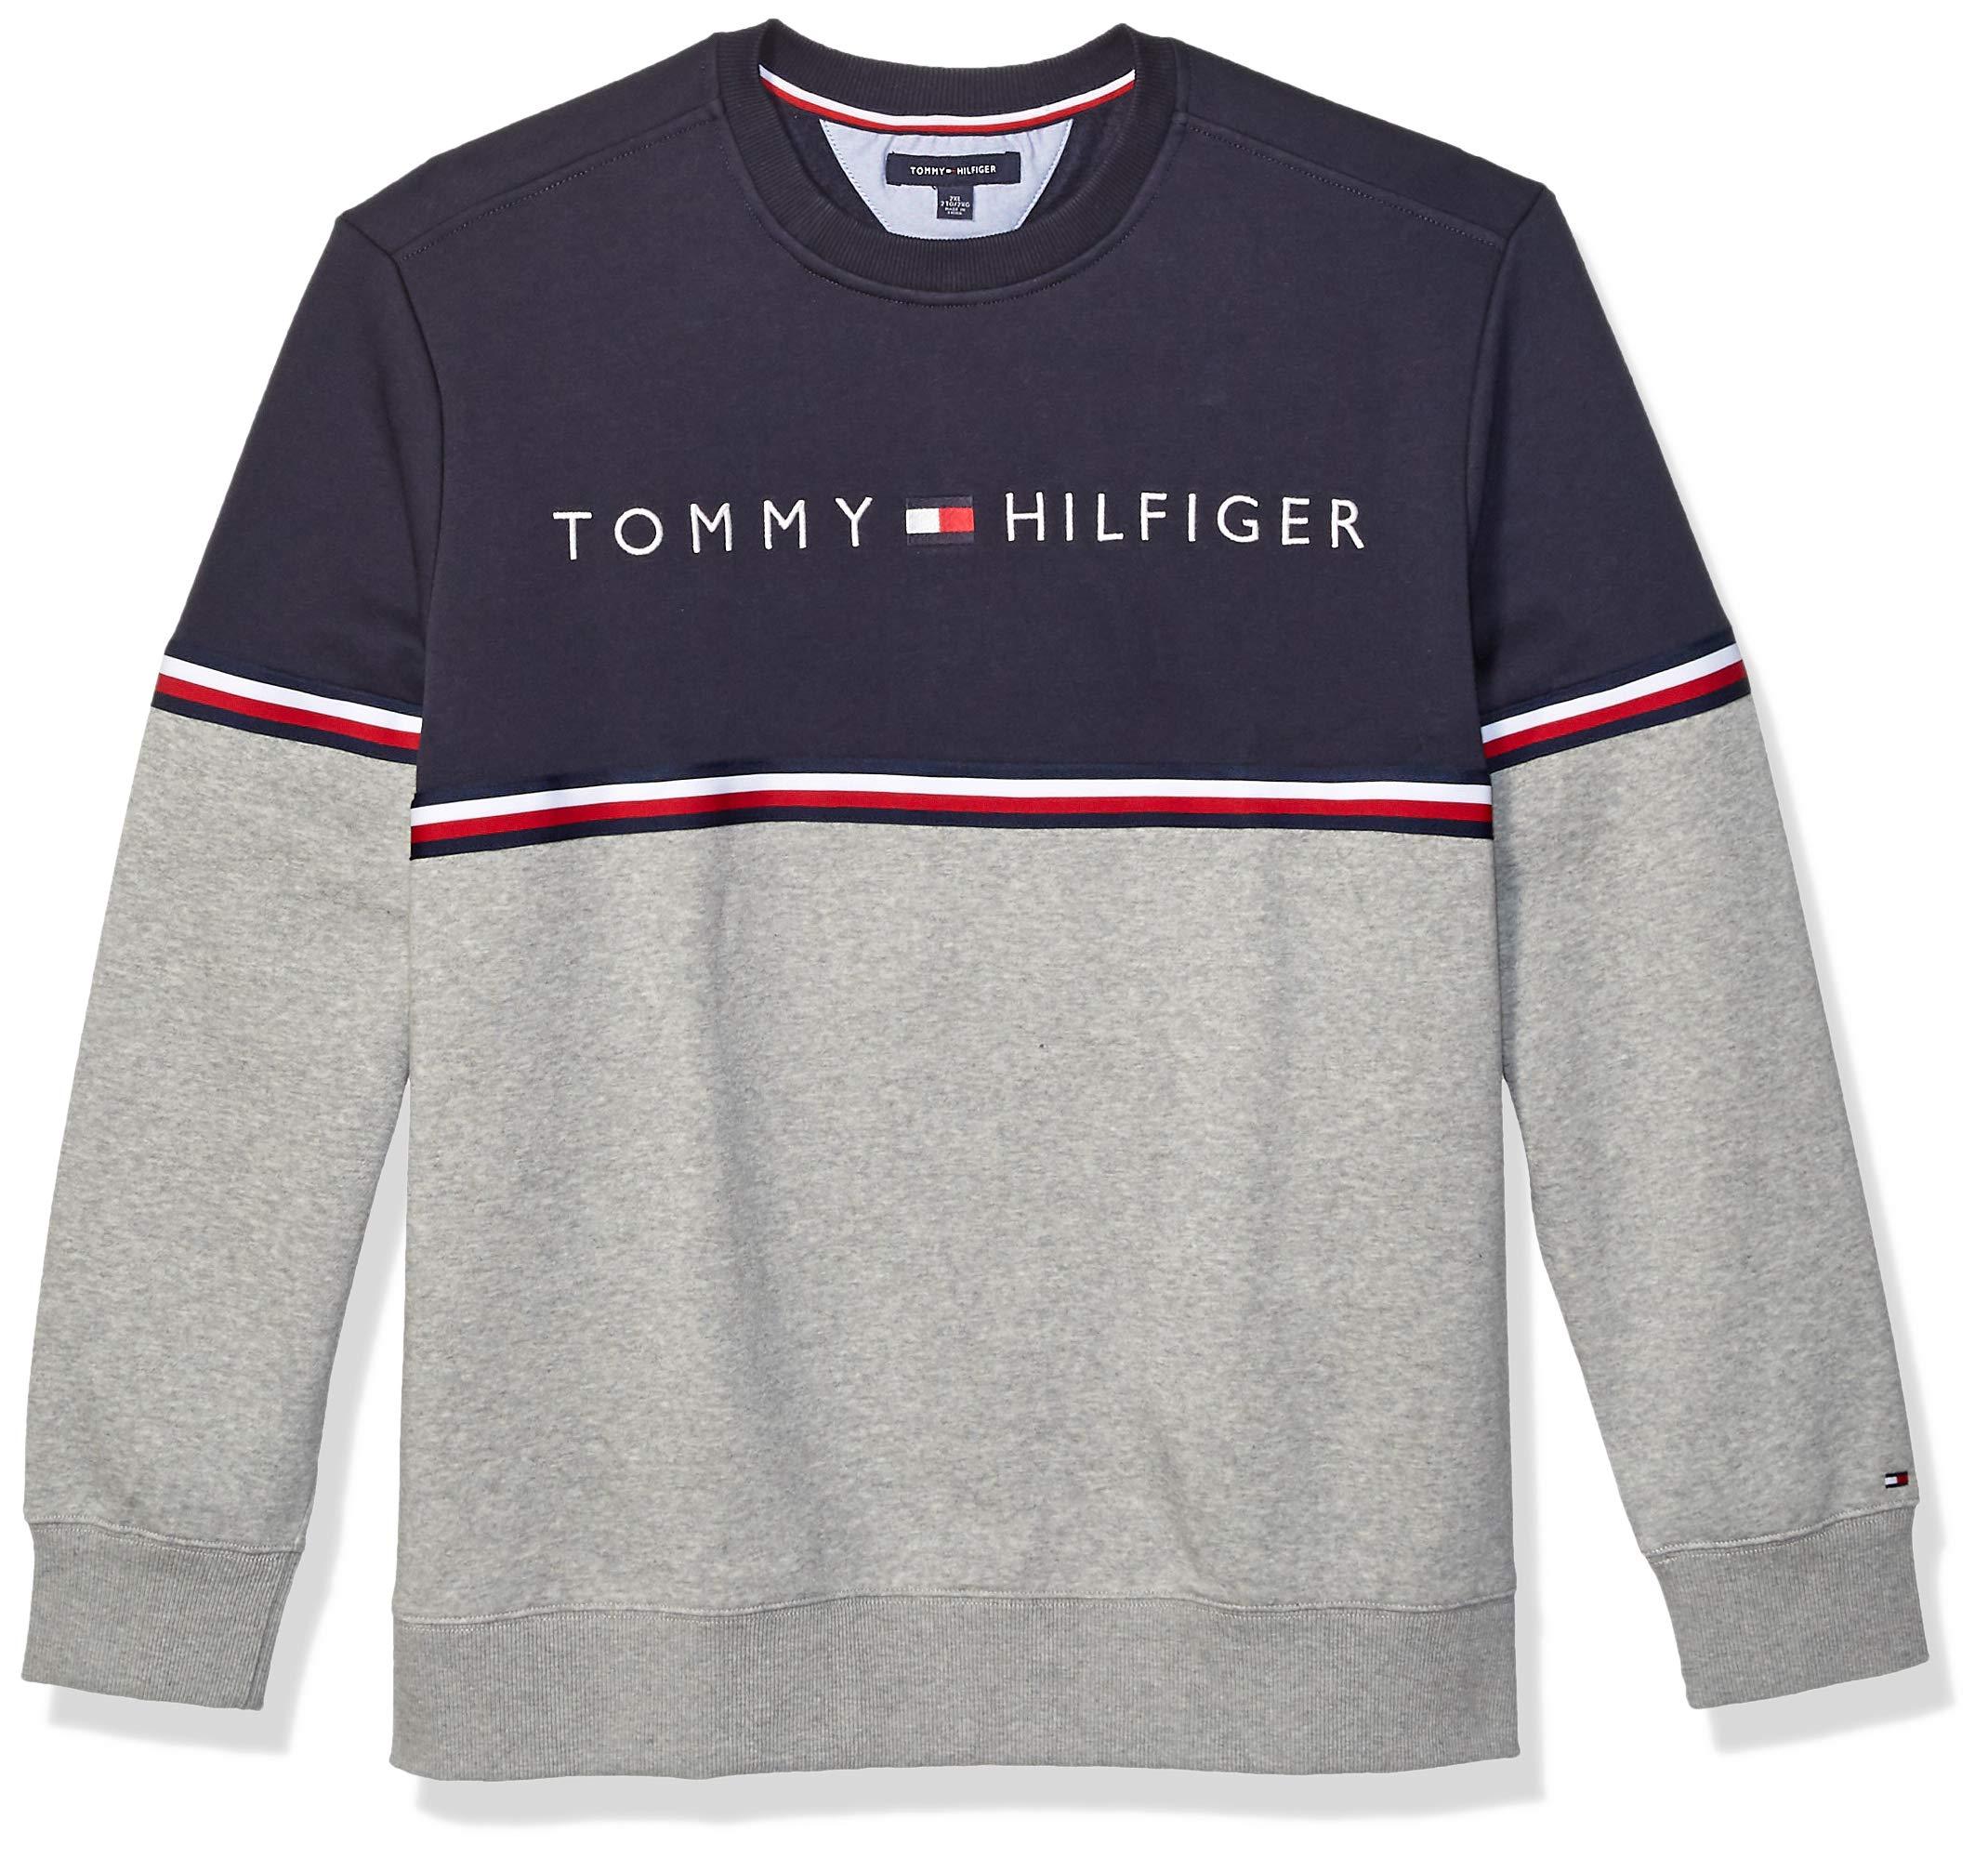 Tommy Hilfiger Big And Tall Crewneck Sweatshirt in Gray for Men - Lyst